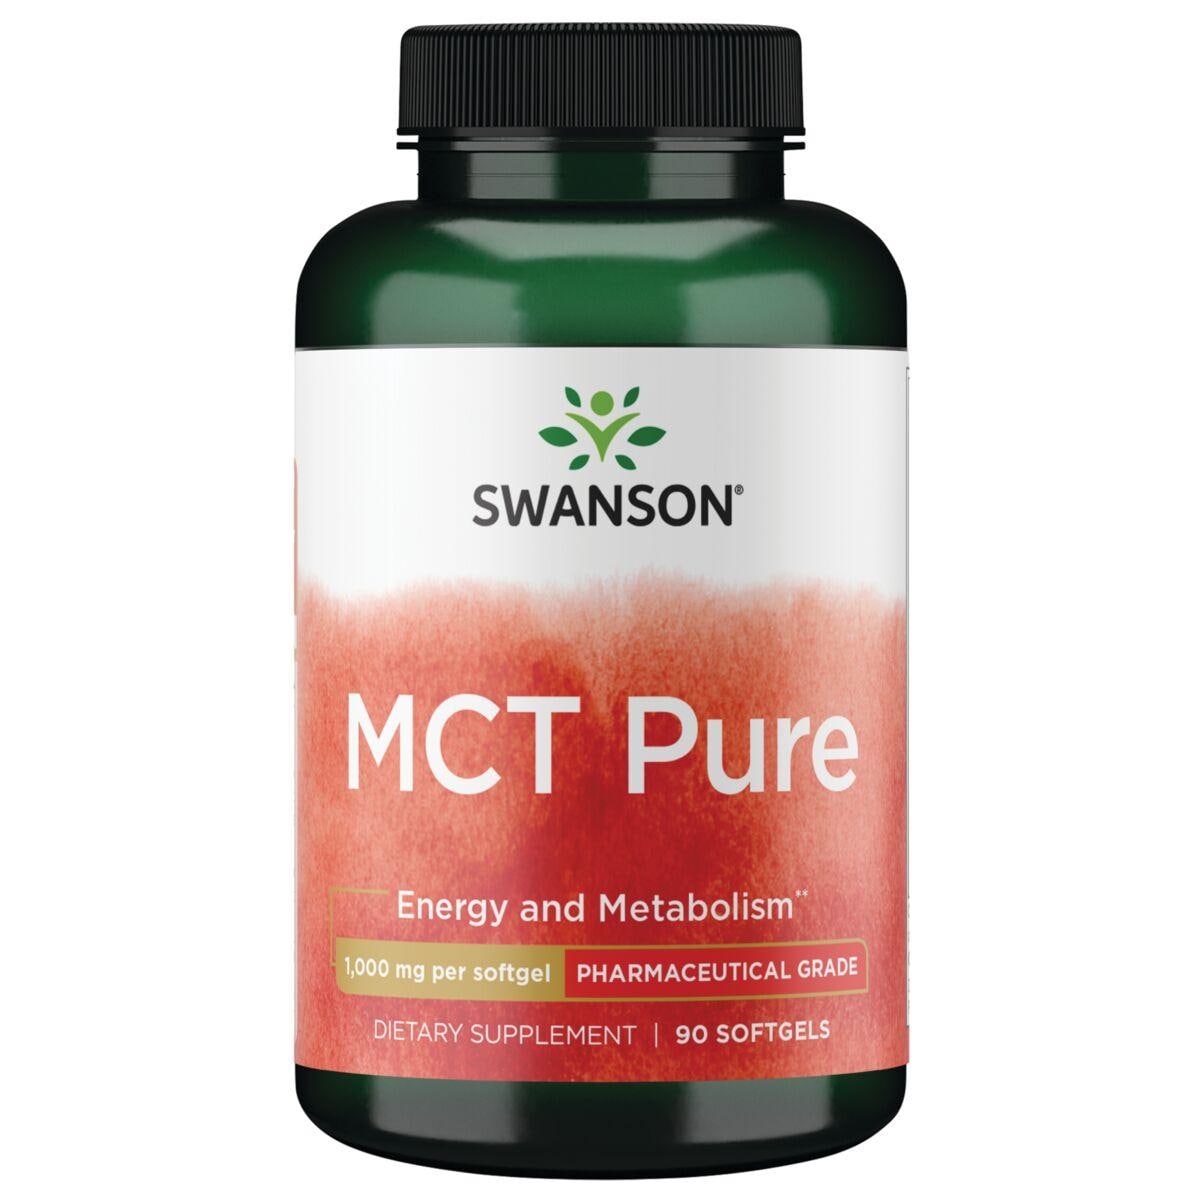 Swanson Ultra Mct Pure - Pharmaceutical Grade Supplement Vitamin | 1000 mg | 90 Soft Gels